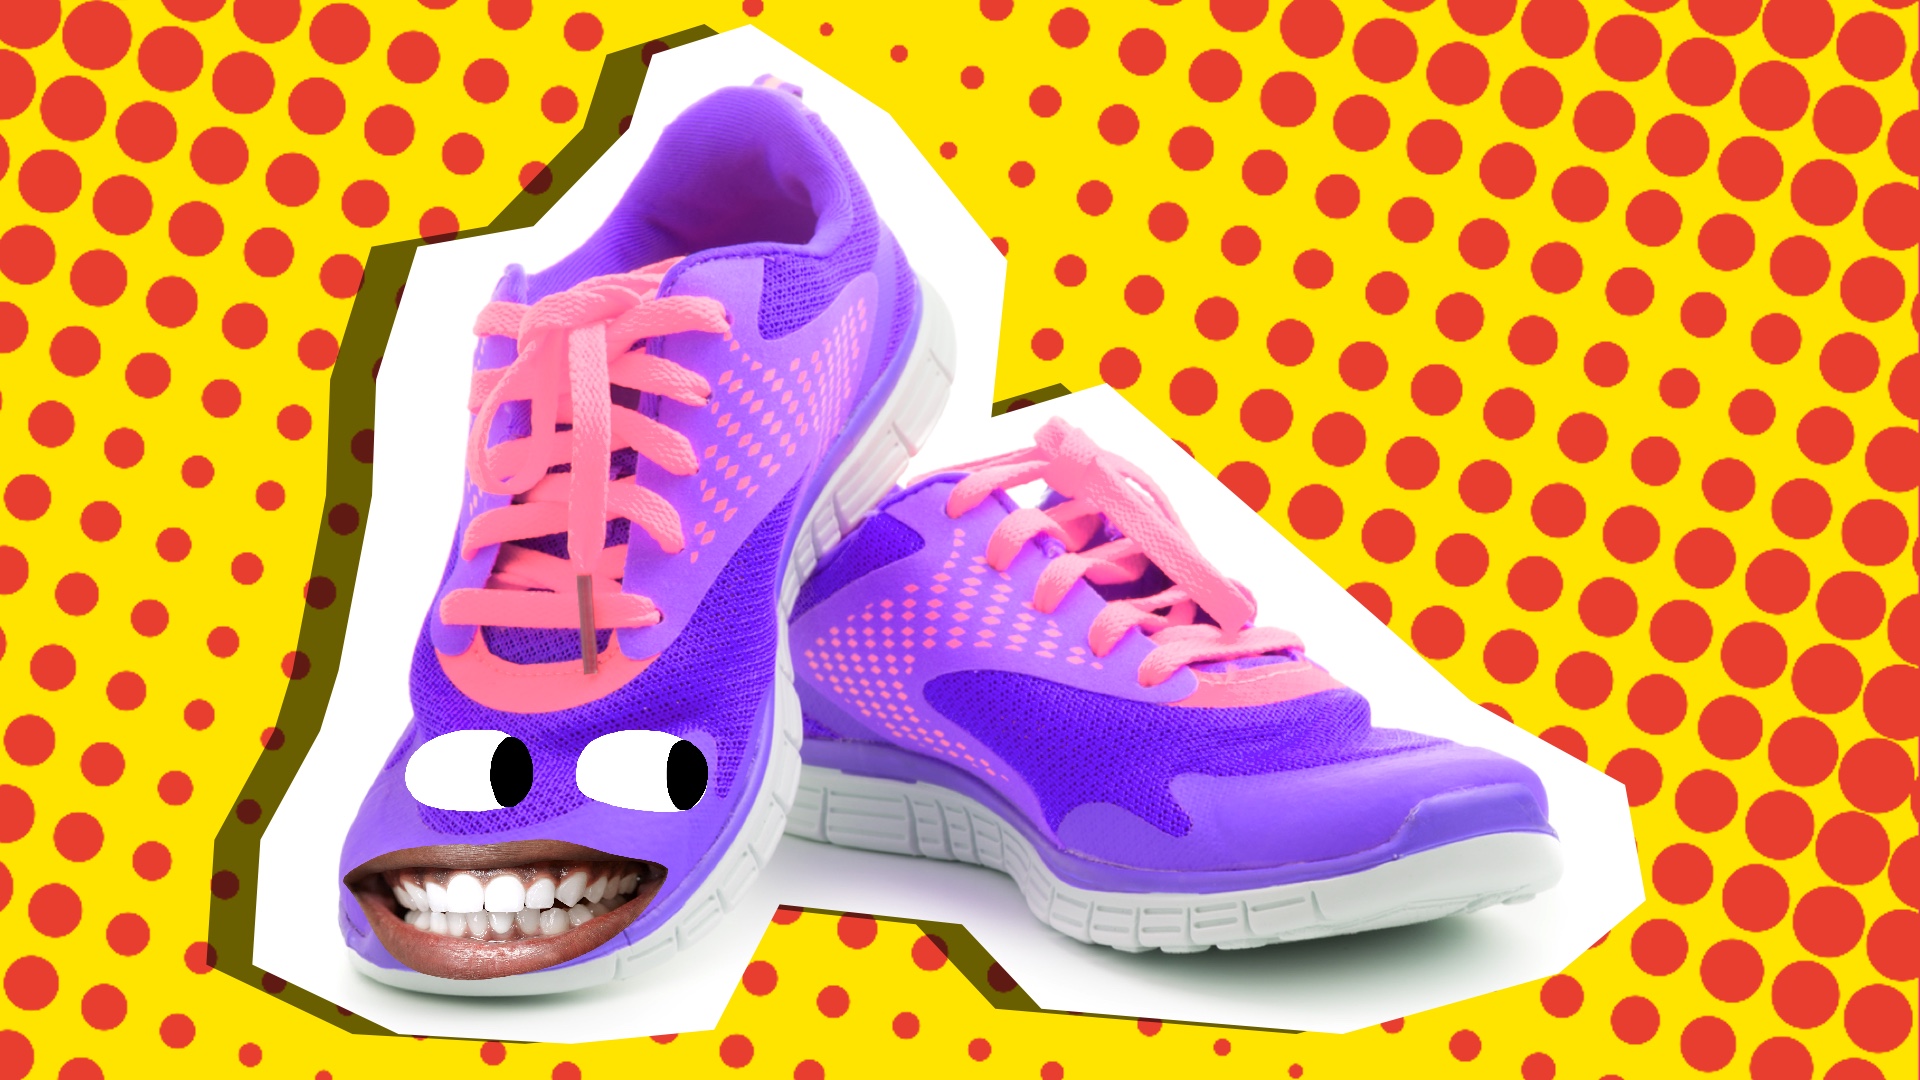 Some smiling running shoes